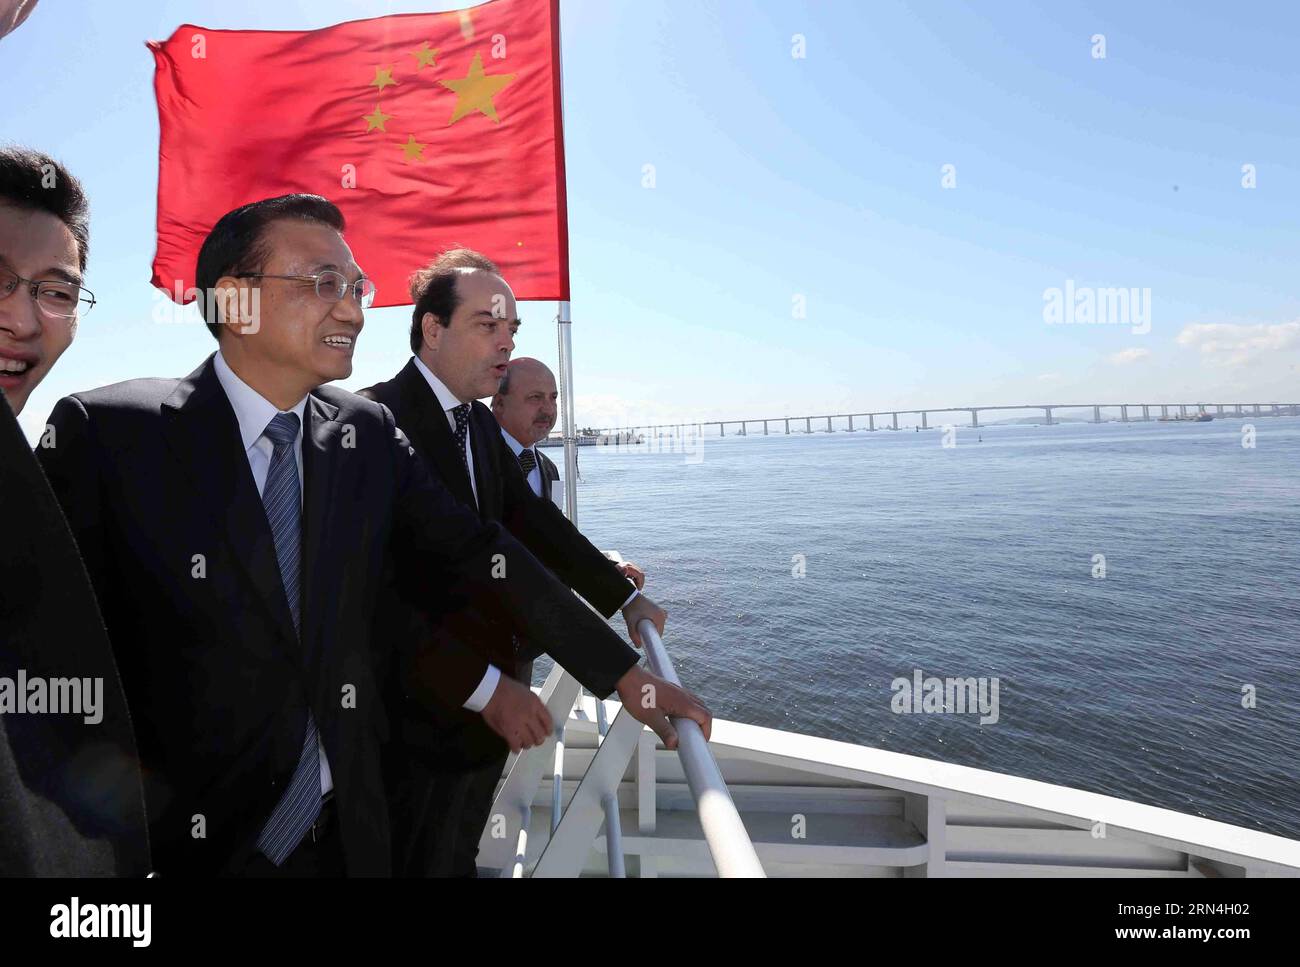 (150520) -- RIO DE JANEIRO, May 20, 2015 -- Chinese Premier Li Keqiang (2nd L) takes a ride on a Chinese-made ferry boat in Rio De Janeiro, Brazil, May 20, 2015. ) (wyo) BRAZIL-RIO DE JANEIRO-CHINESE PREMIER-VISIT LiuxWeibing PUBLICATIONxNOTxINxCHN   150520 Rio de Janeiro May 20 2015 Chinese Premier left Keqiang 2nd l Takes a Ride ON a Chinese Made Ferry Boat in Rio de Janeiro Brazil May 20 2015 wyo Brazil Rio de Janeiro Chinese Premier Visit LiuxWeibing PUBLICATIONxNOTxINxCHN Stock Photo